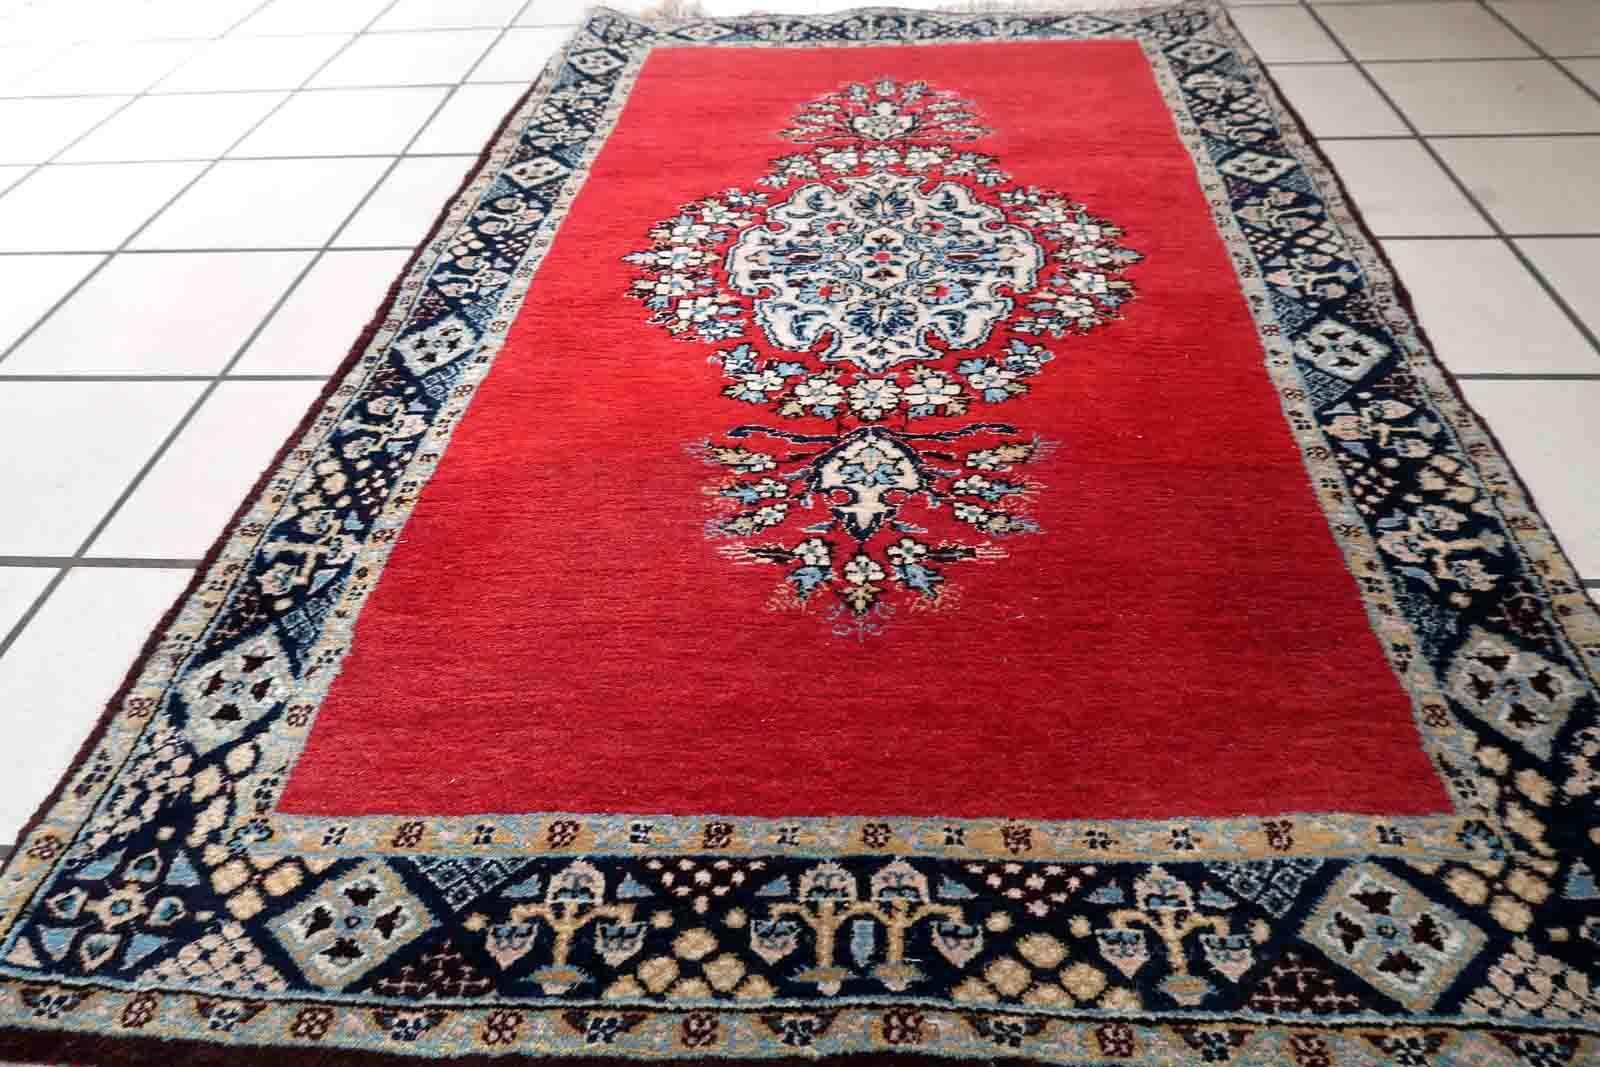 Handmade vintage Tabriz rug in bright red color with large medallion. The rug is from the middle of 20th century in original good condition.

-condition: original good,

-circa: 1950s,

-size: 2.6' x 4.1' (80cm x 126cm),

-material: